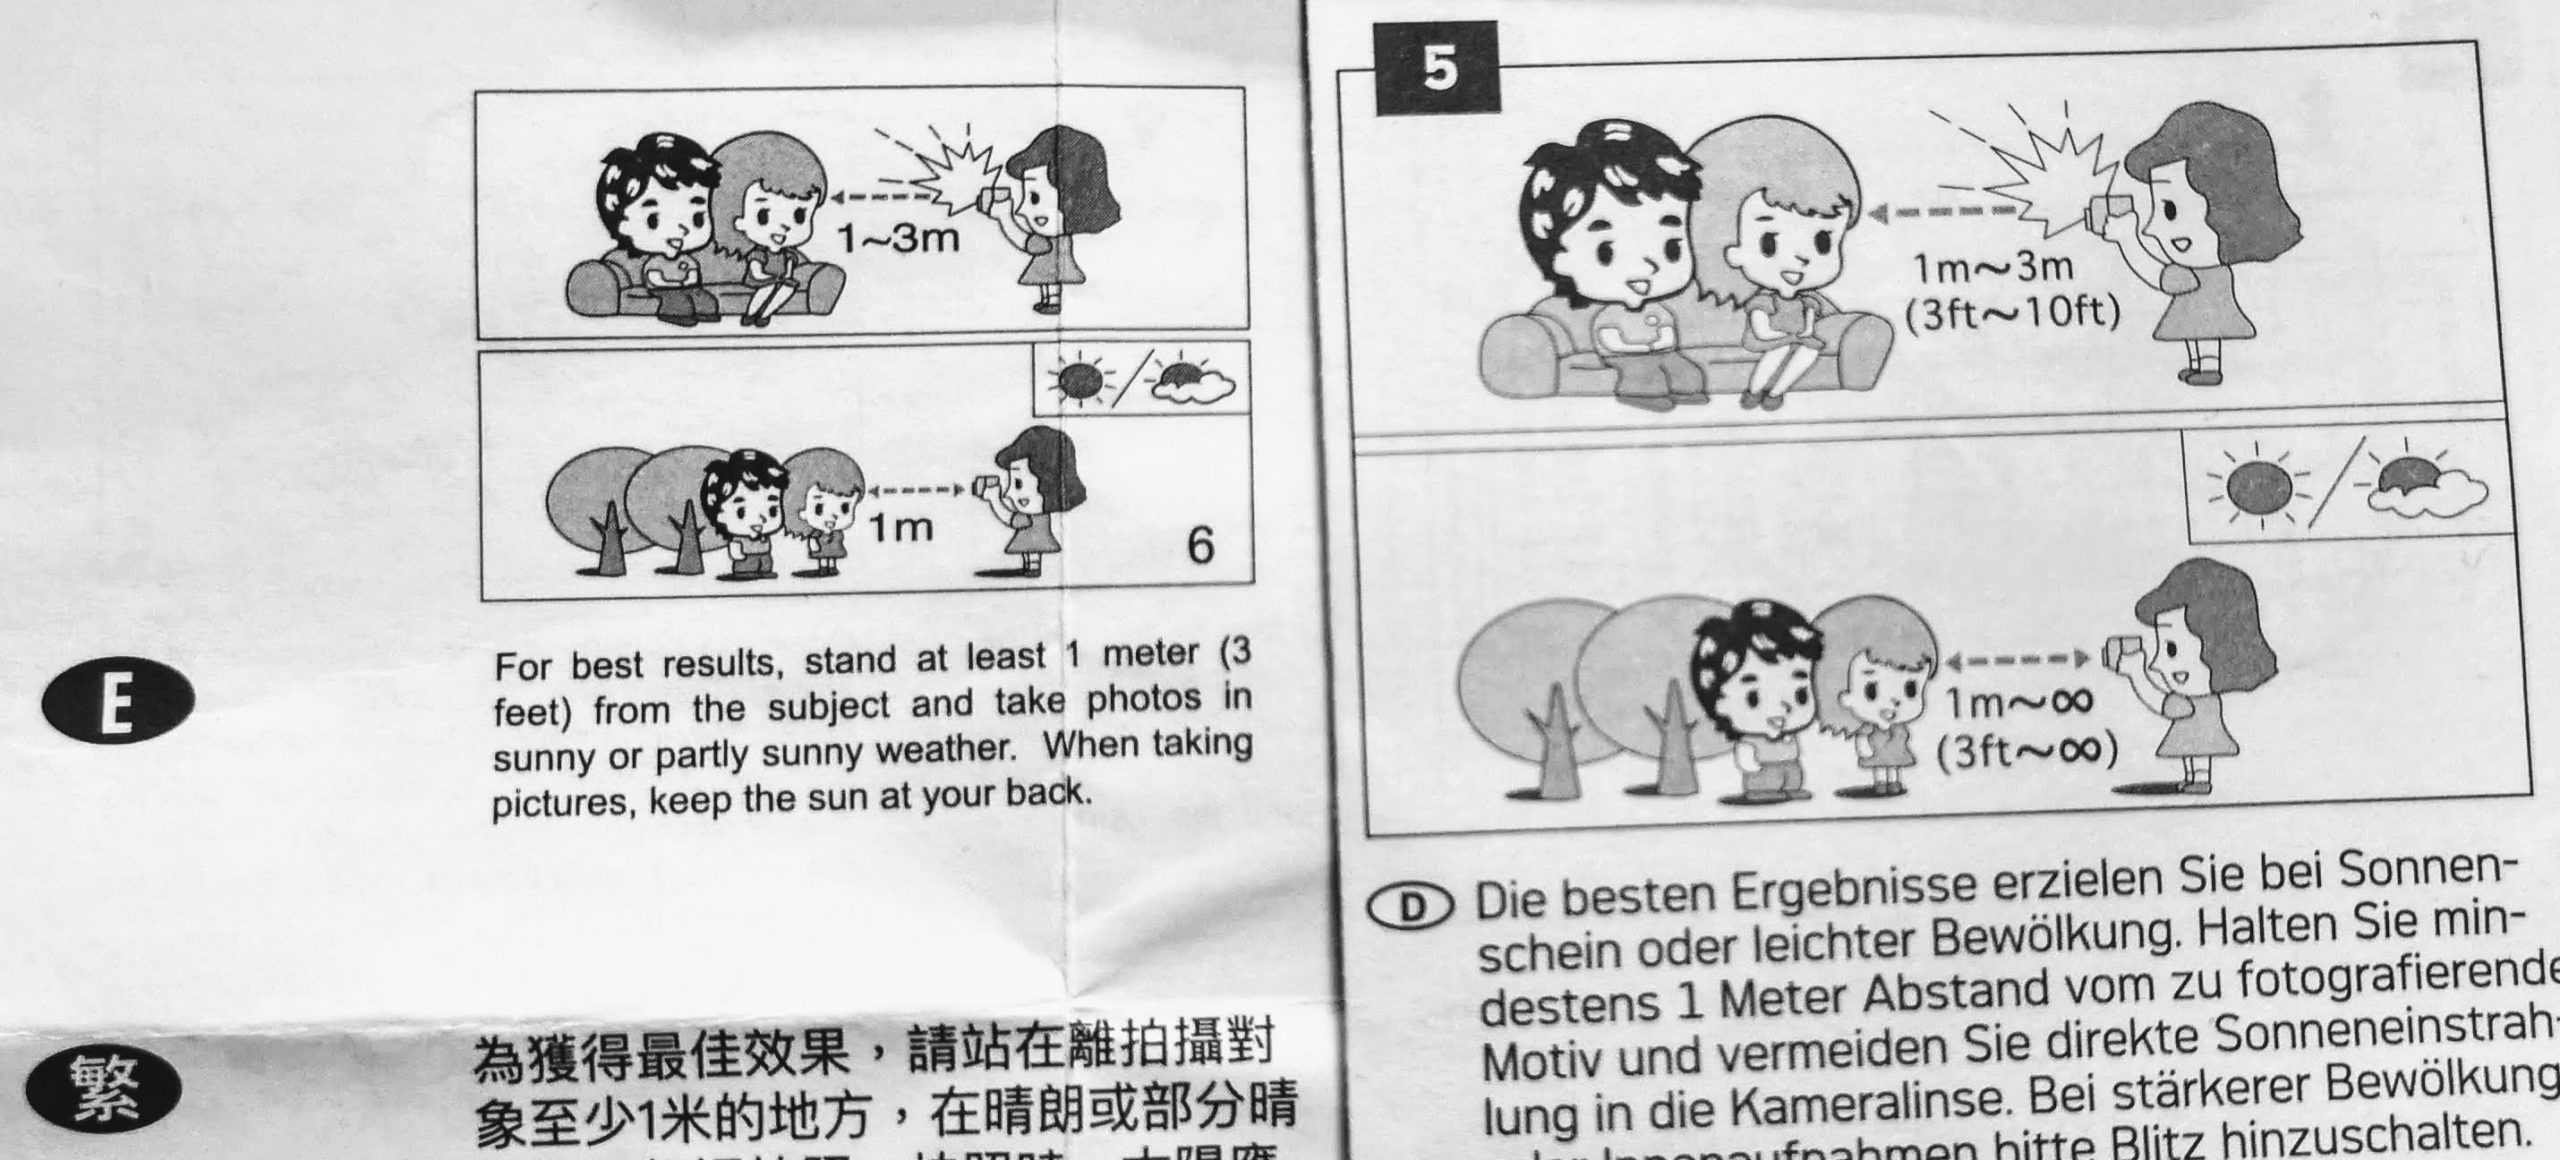 Similar Illustrations with the Kodak M35 (l) and the Agfaphoto Analogue (r) instructions